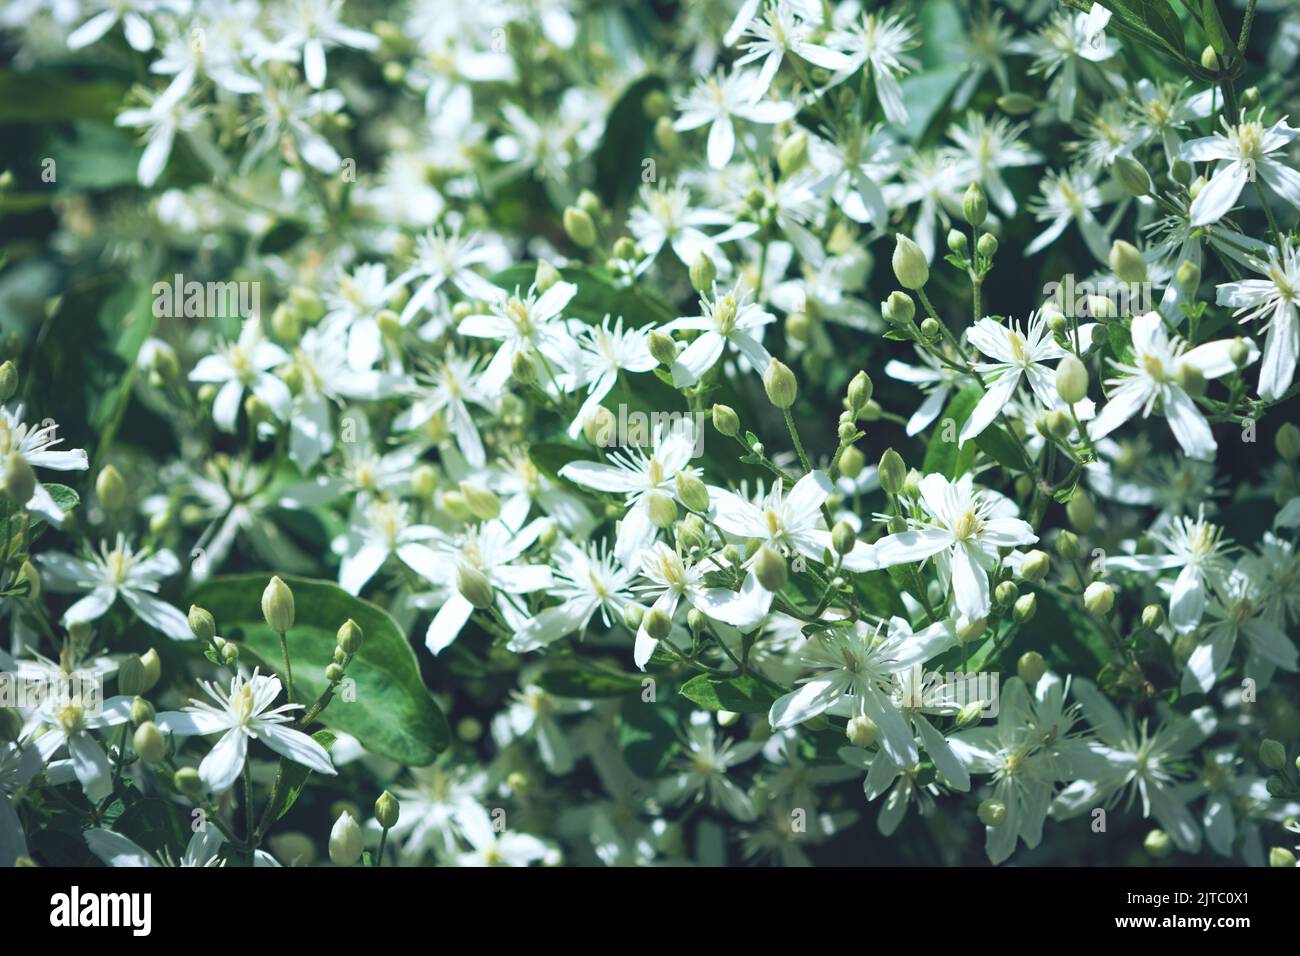 Clematis flammula fragrant white flowers texture in spring garden Stock Photo